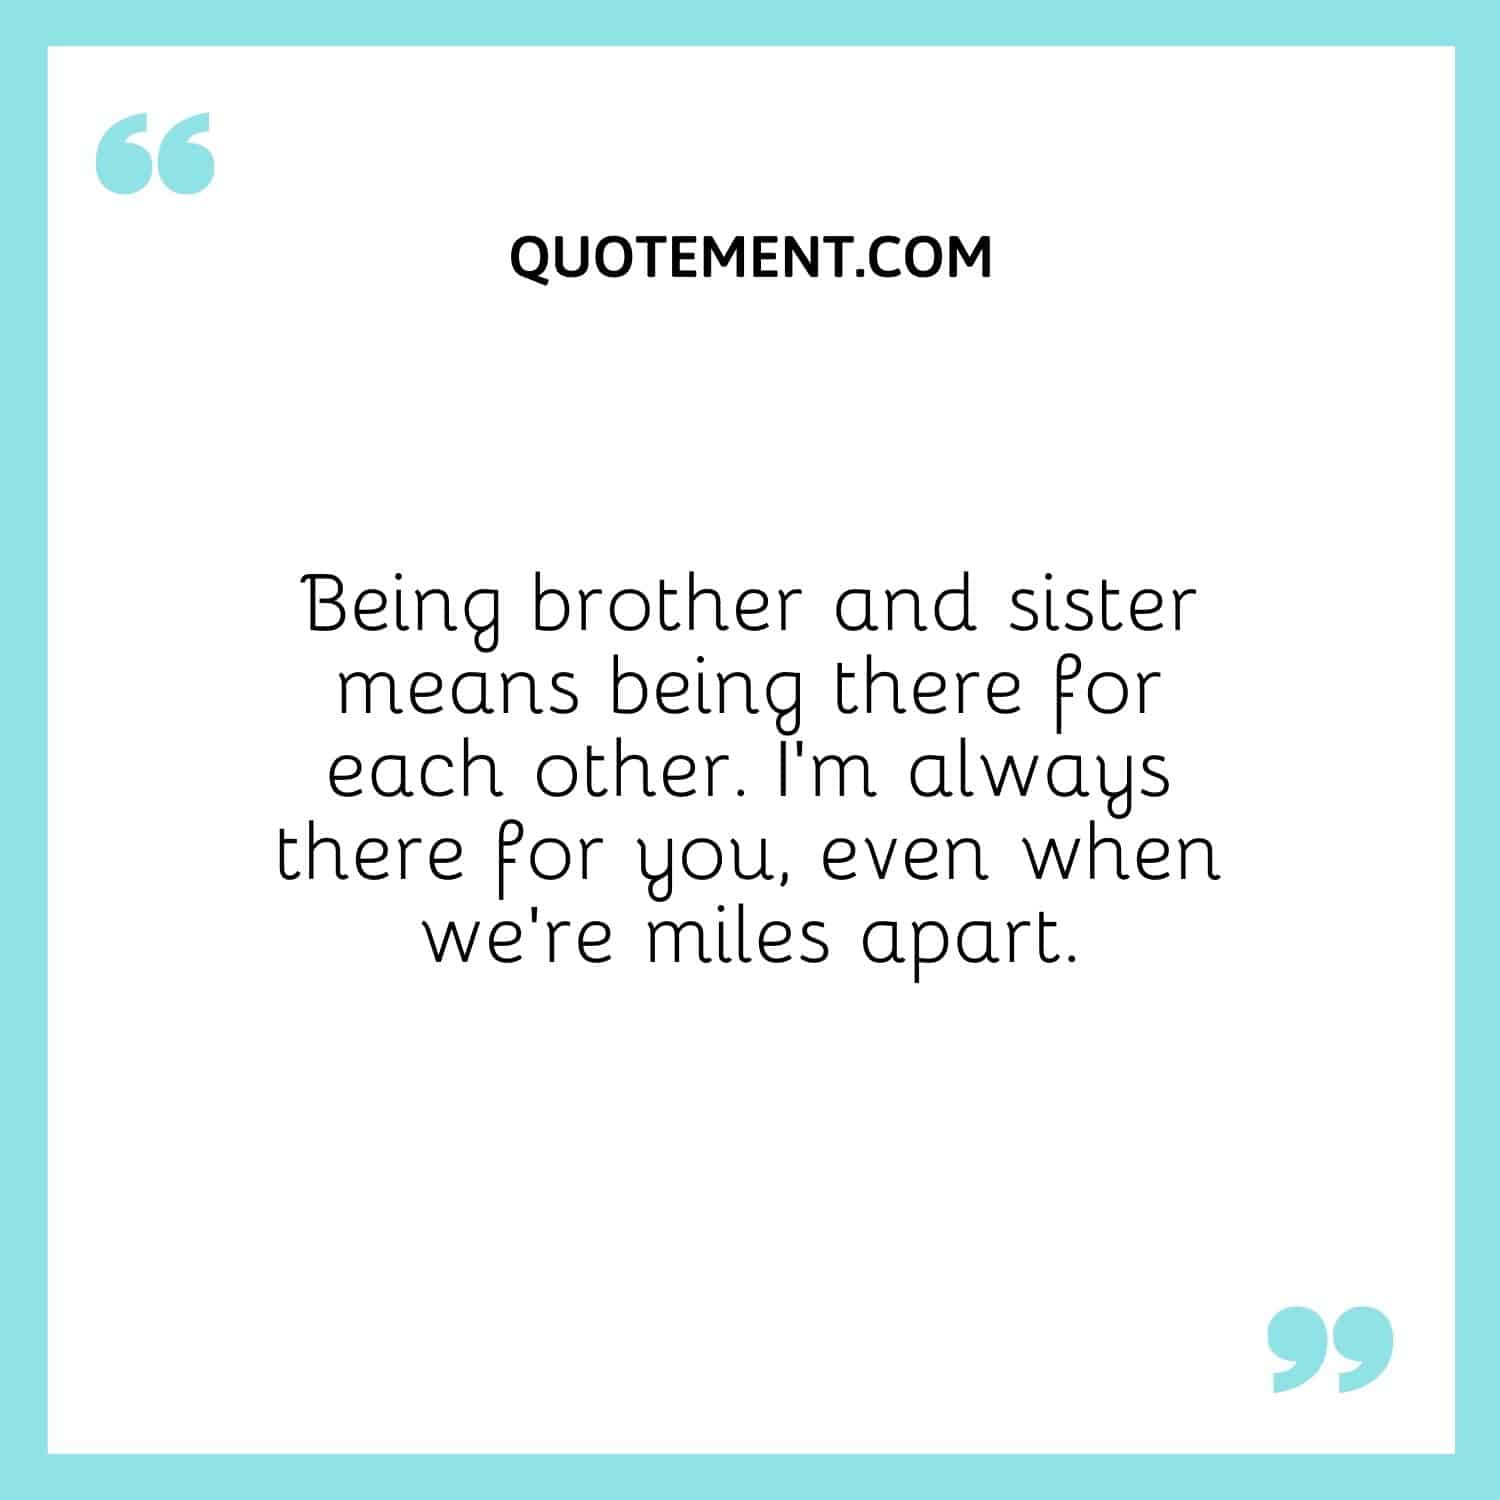 Being brother and sister means being there for each other. I’m always there for you, even when we’re miles apart.